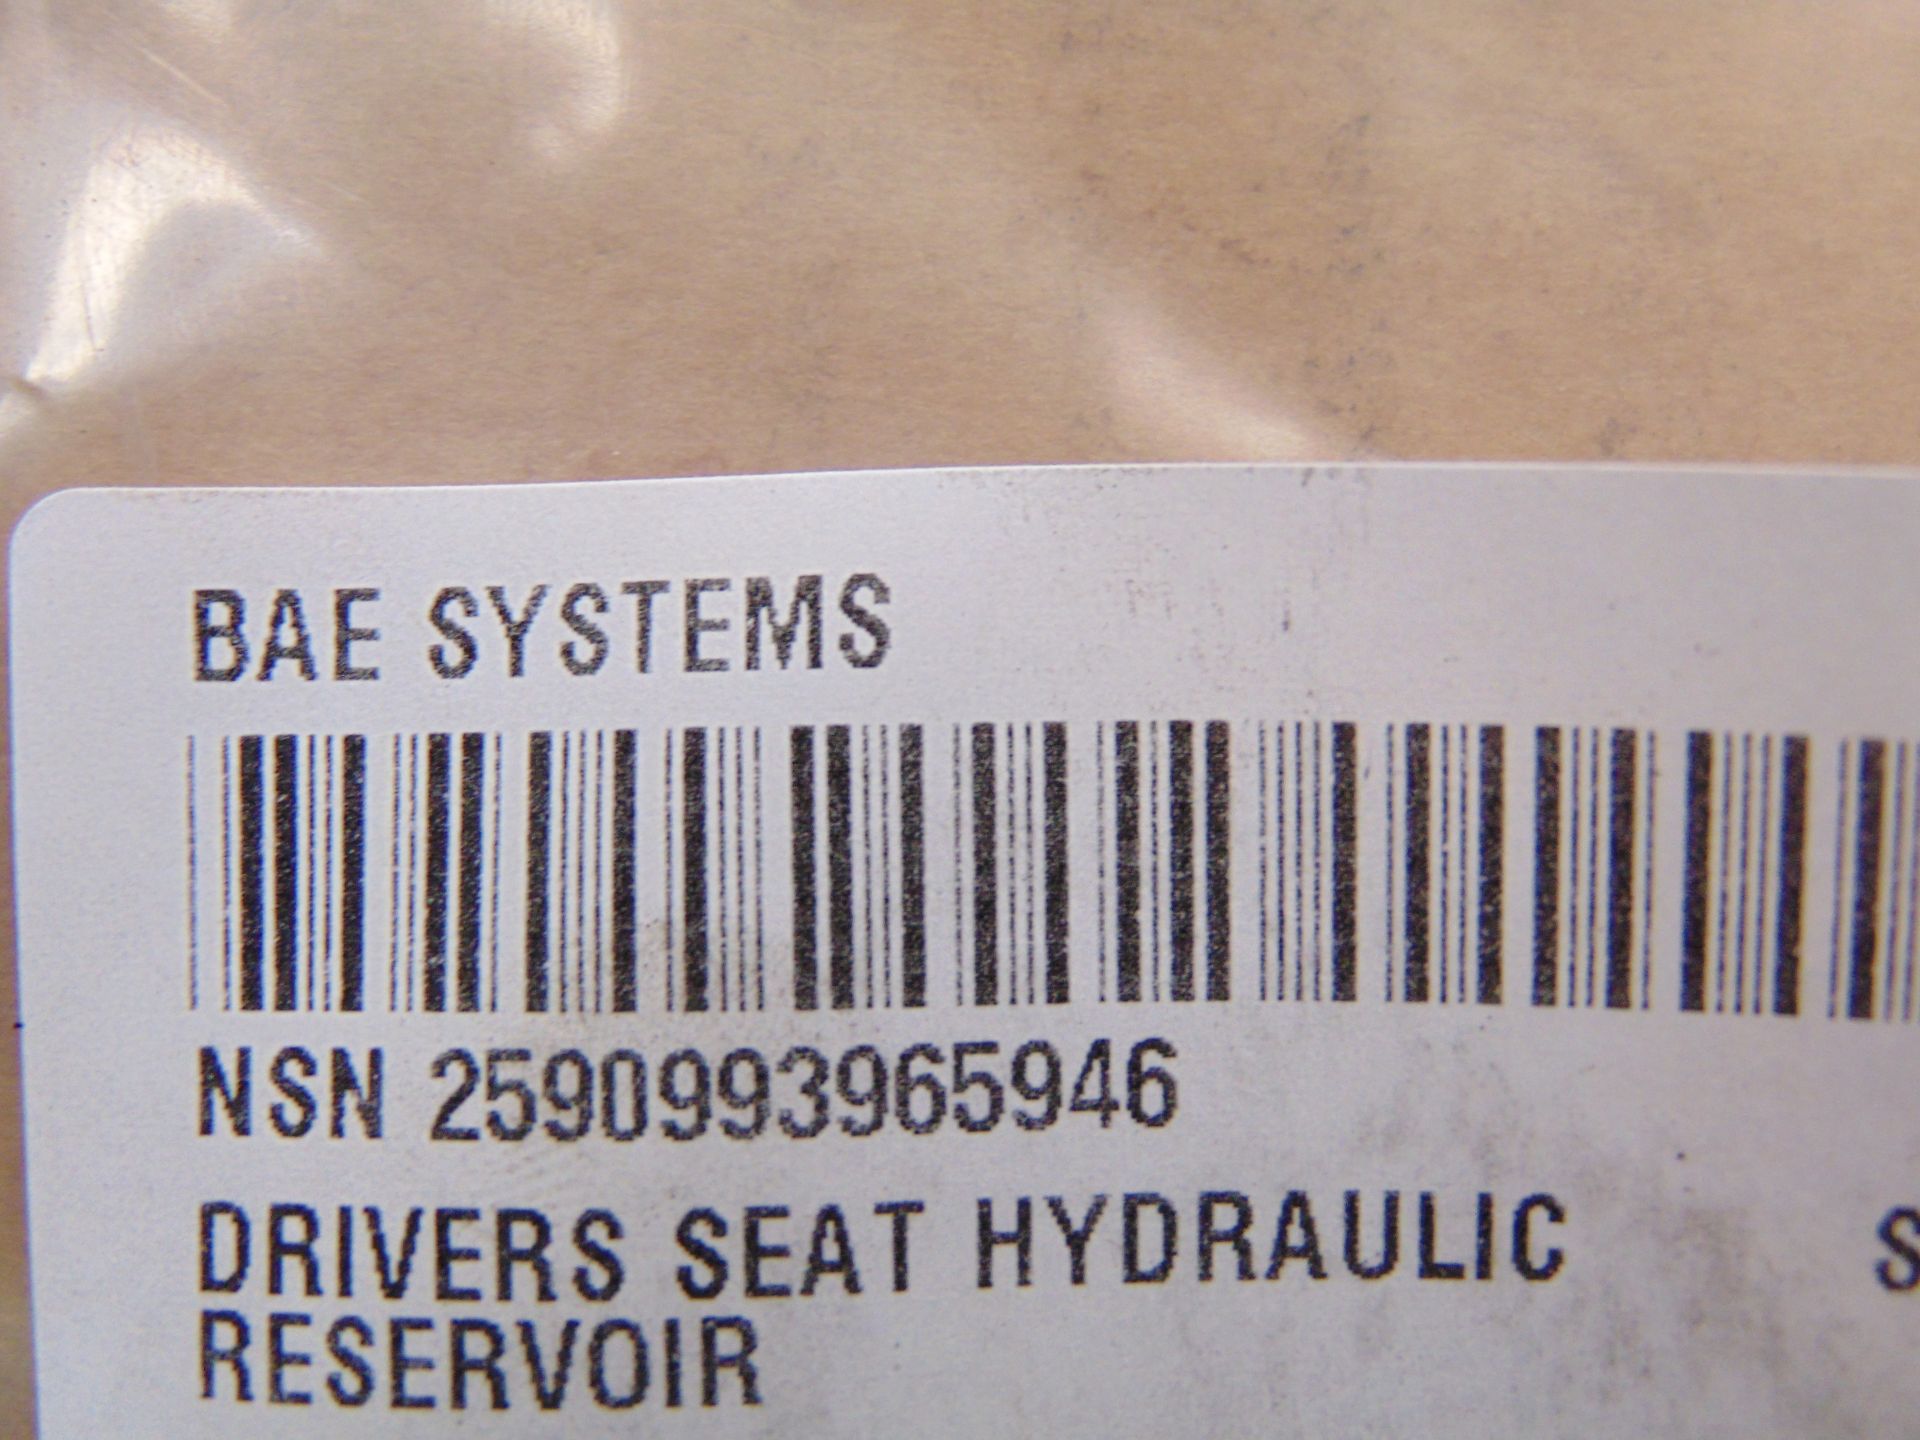 Drivers Seat Hydraulic Reservoir P/no HM6020/63 - Image 7 of 7